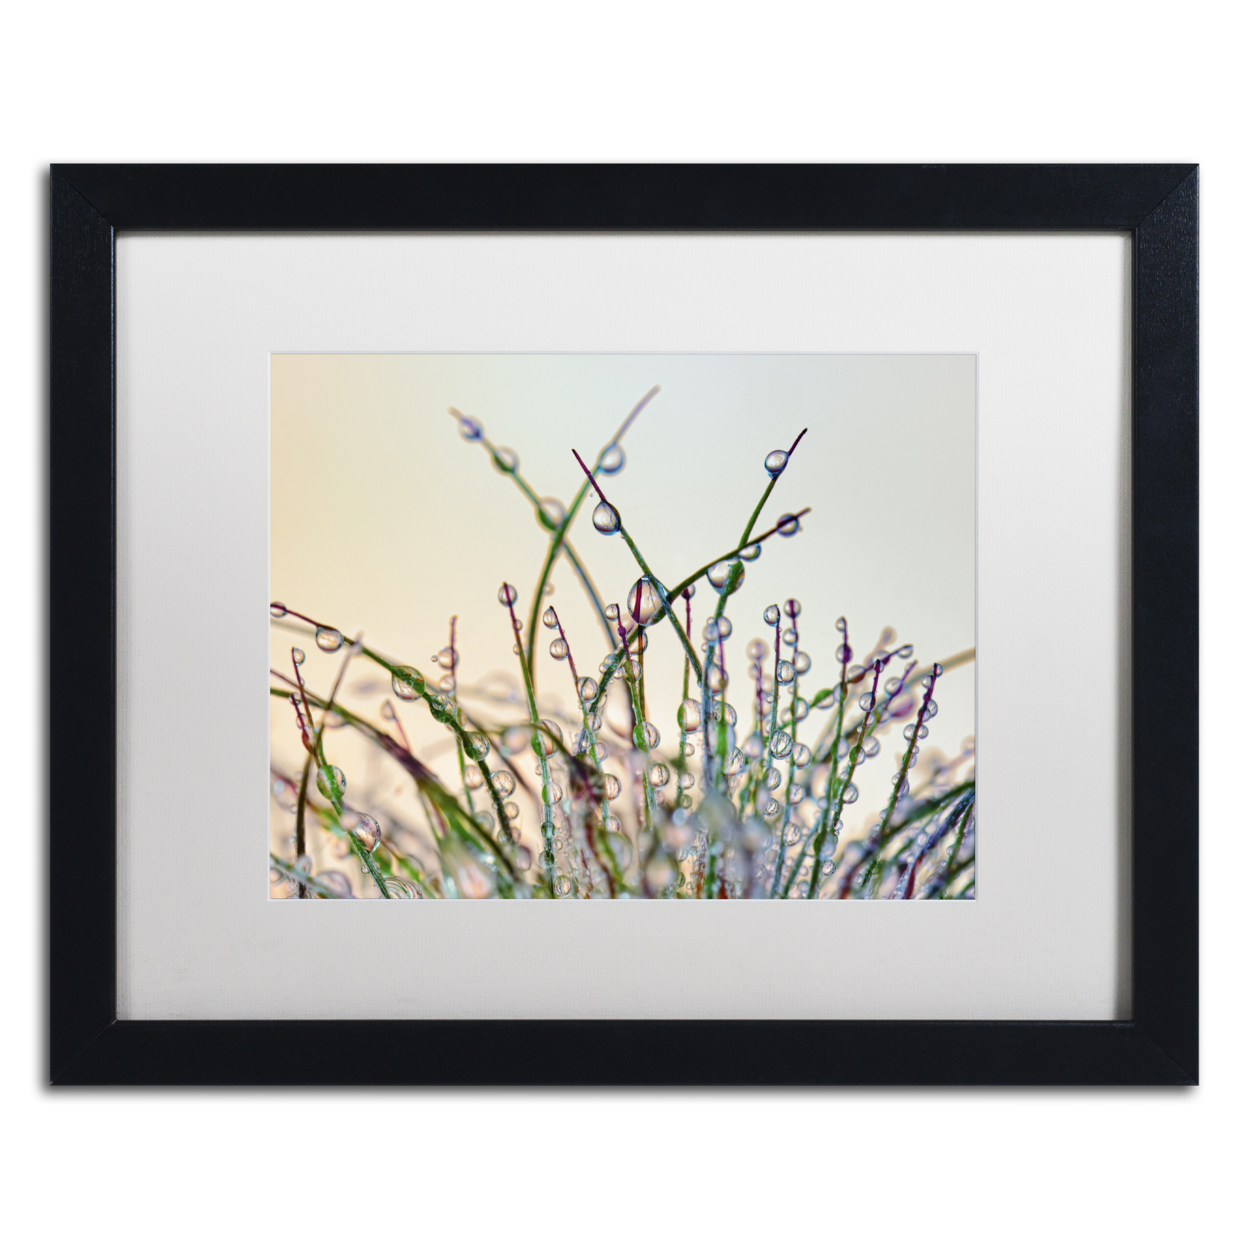 Cora Niele 'Dewy Grass' Black Wooden Framed Art 18 X 22 Inches